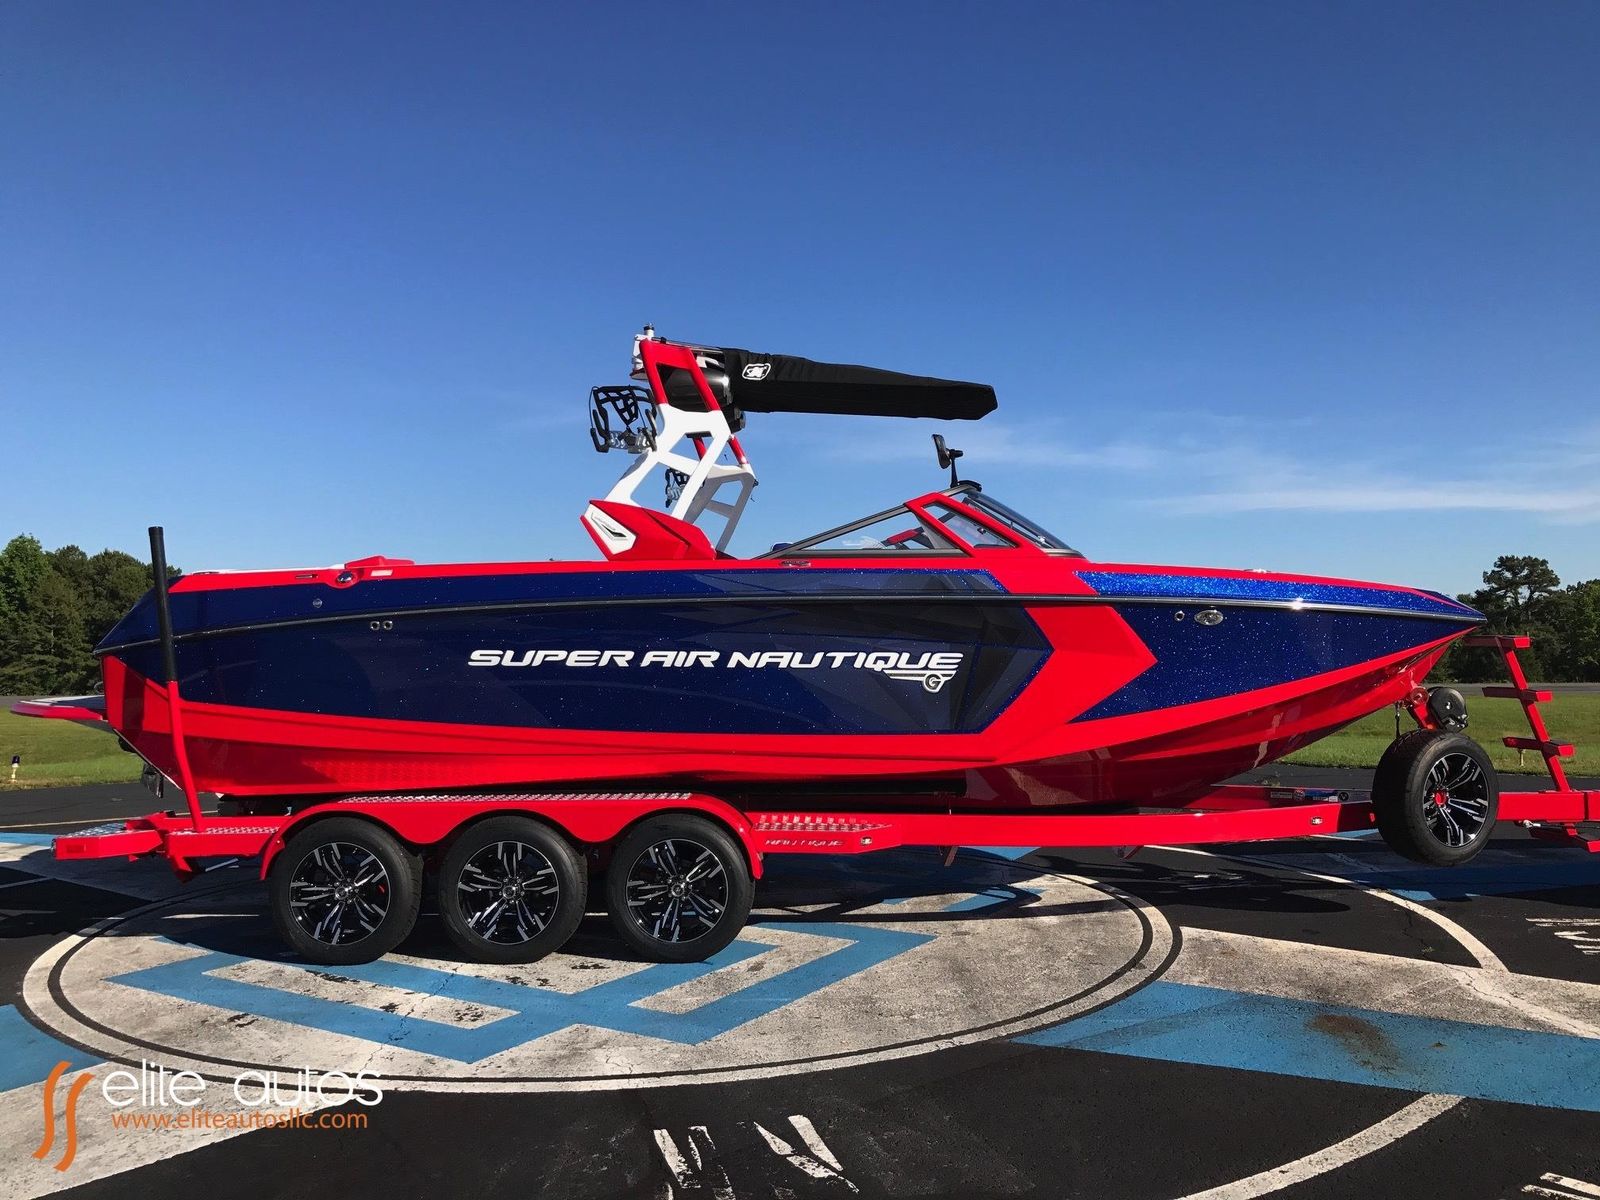 Correct Craft Super Air Nautique G25 2017 for sale for 159,980